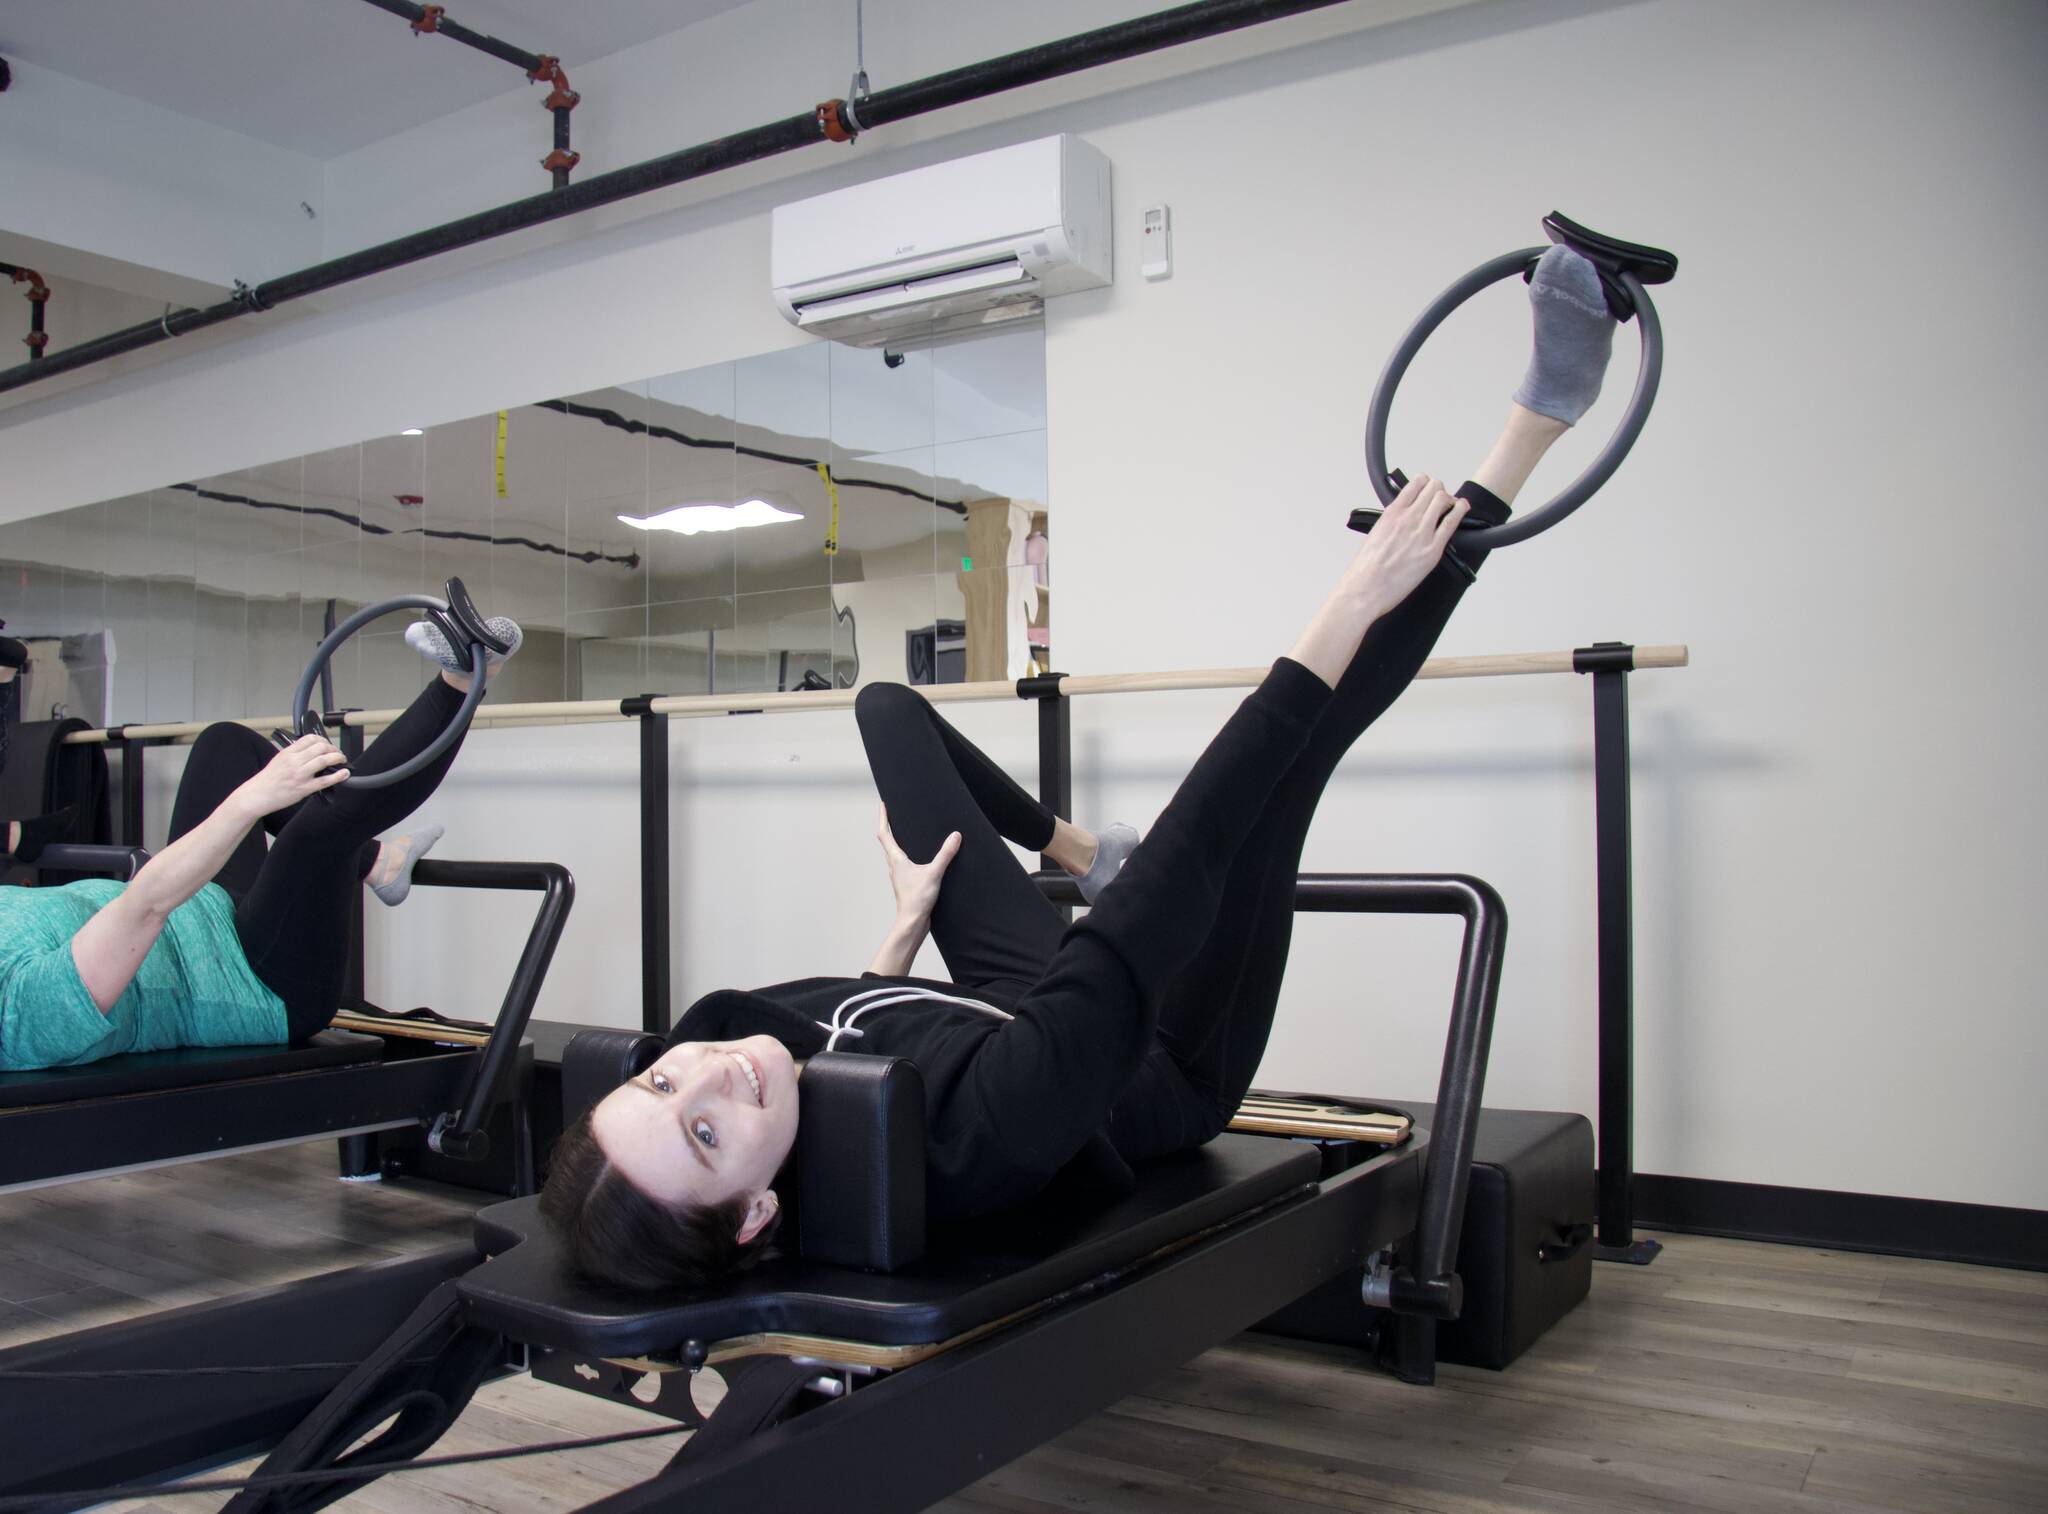 Photo by Brandon Berry
Some Pilates classes involve the use of resistance ring.